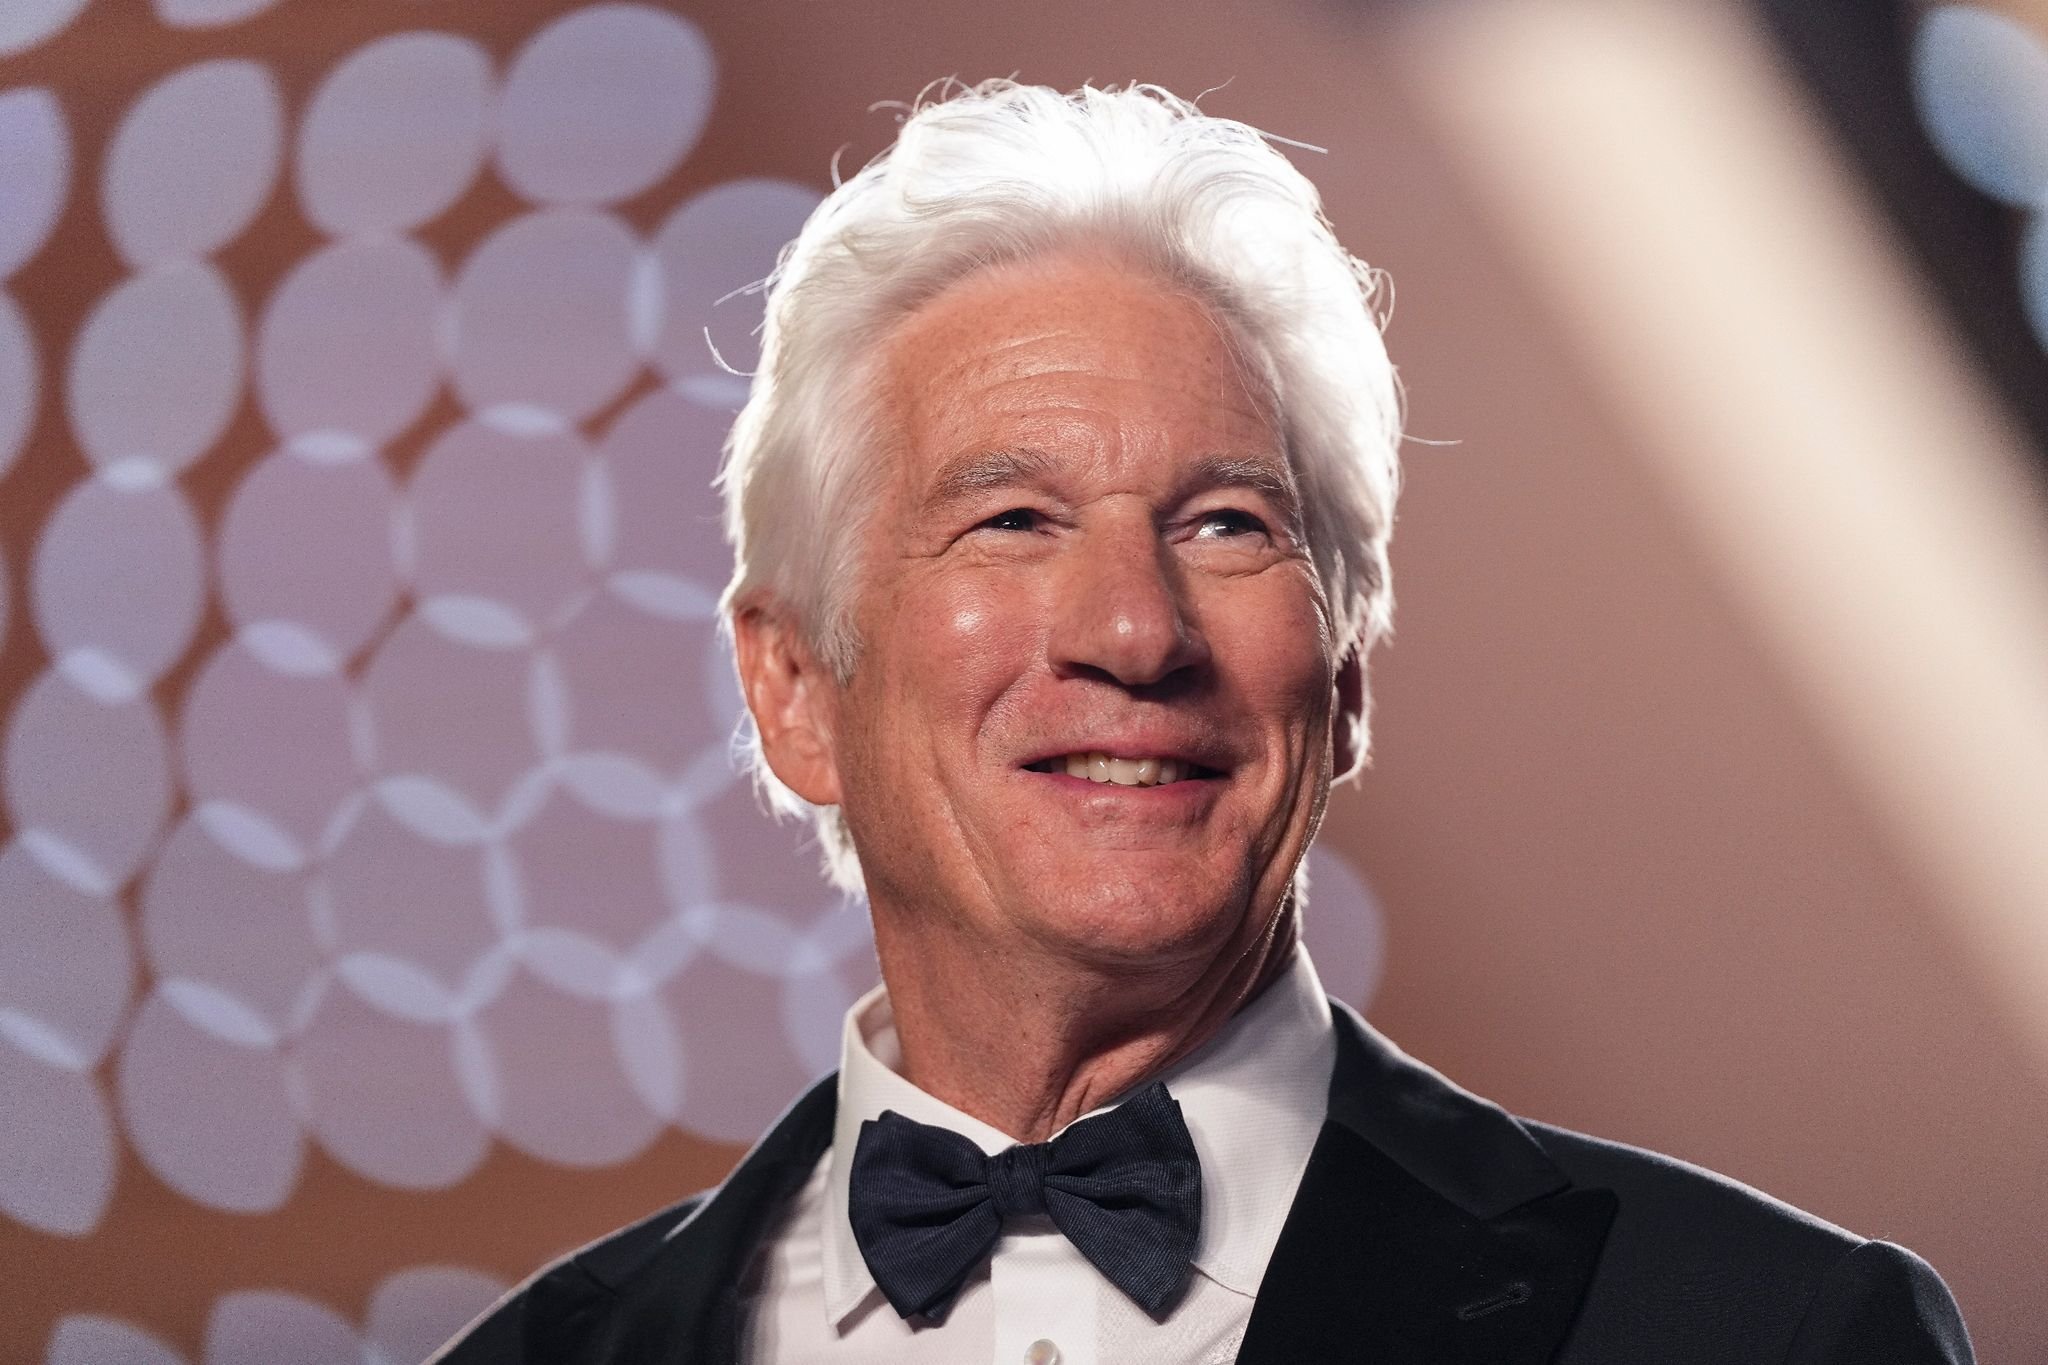 Richard Gere on ageing as an actor